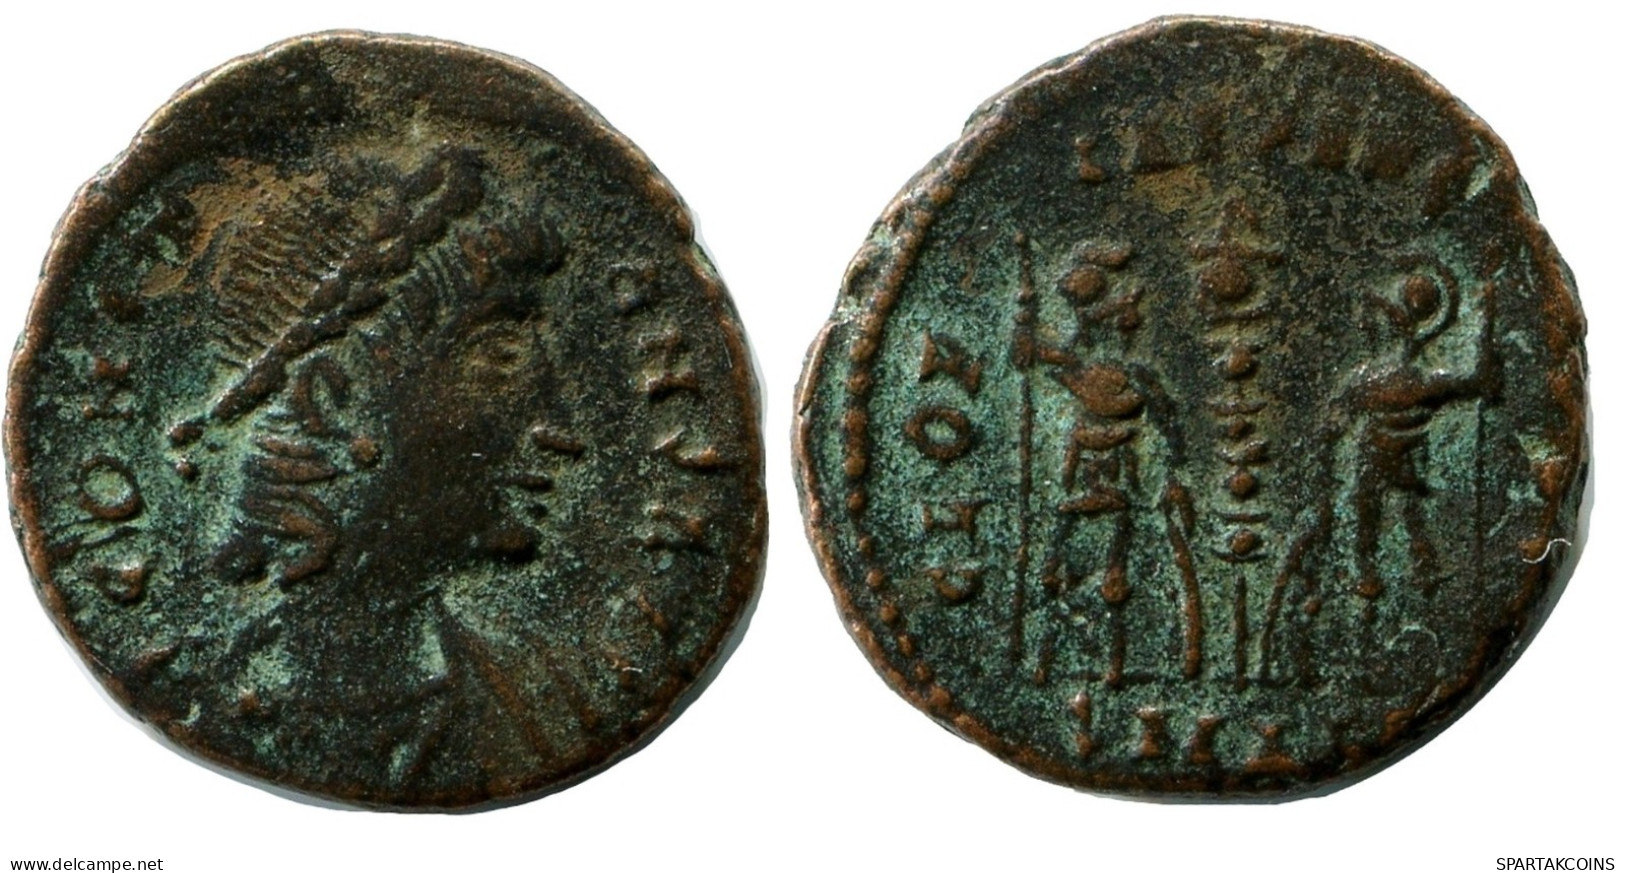 CONSTANS MINTED IN ALEKSANDRIA FROM THE ROYAL ONTARIO MUSEUM #ANC11357.14.E.A - Der Christlischen Kaiser (307 / 363)